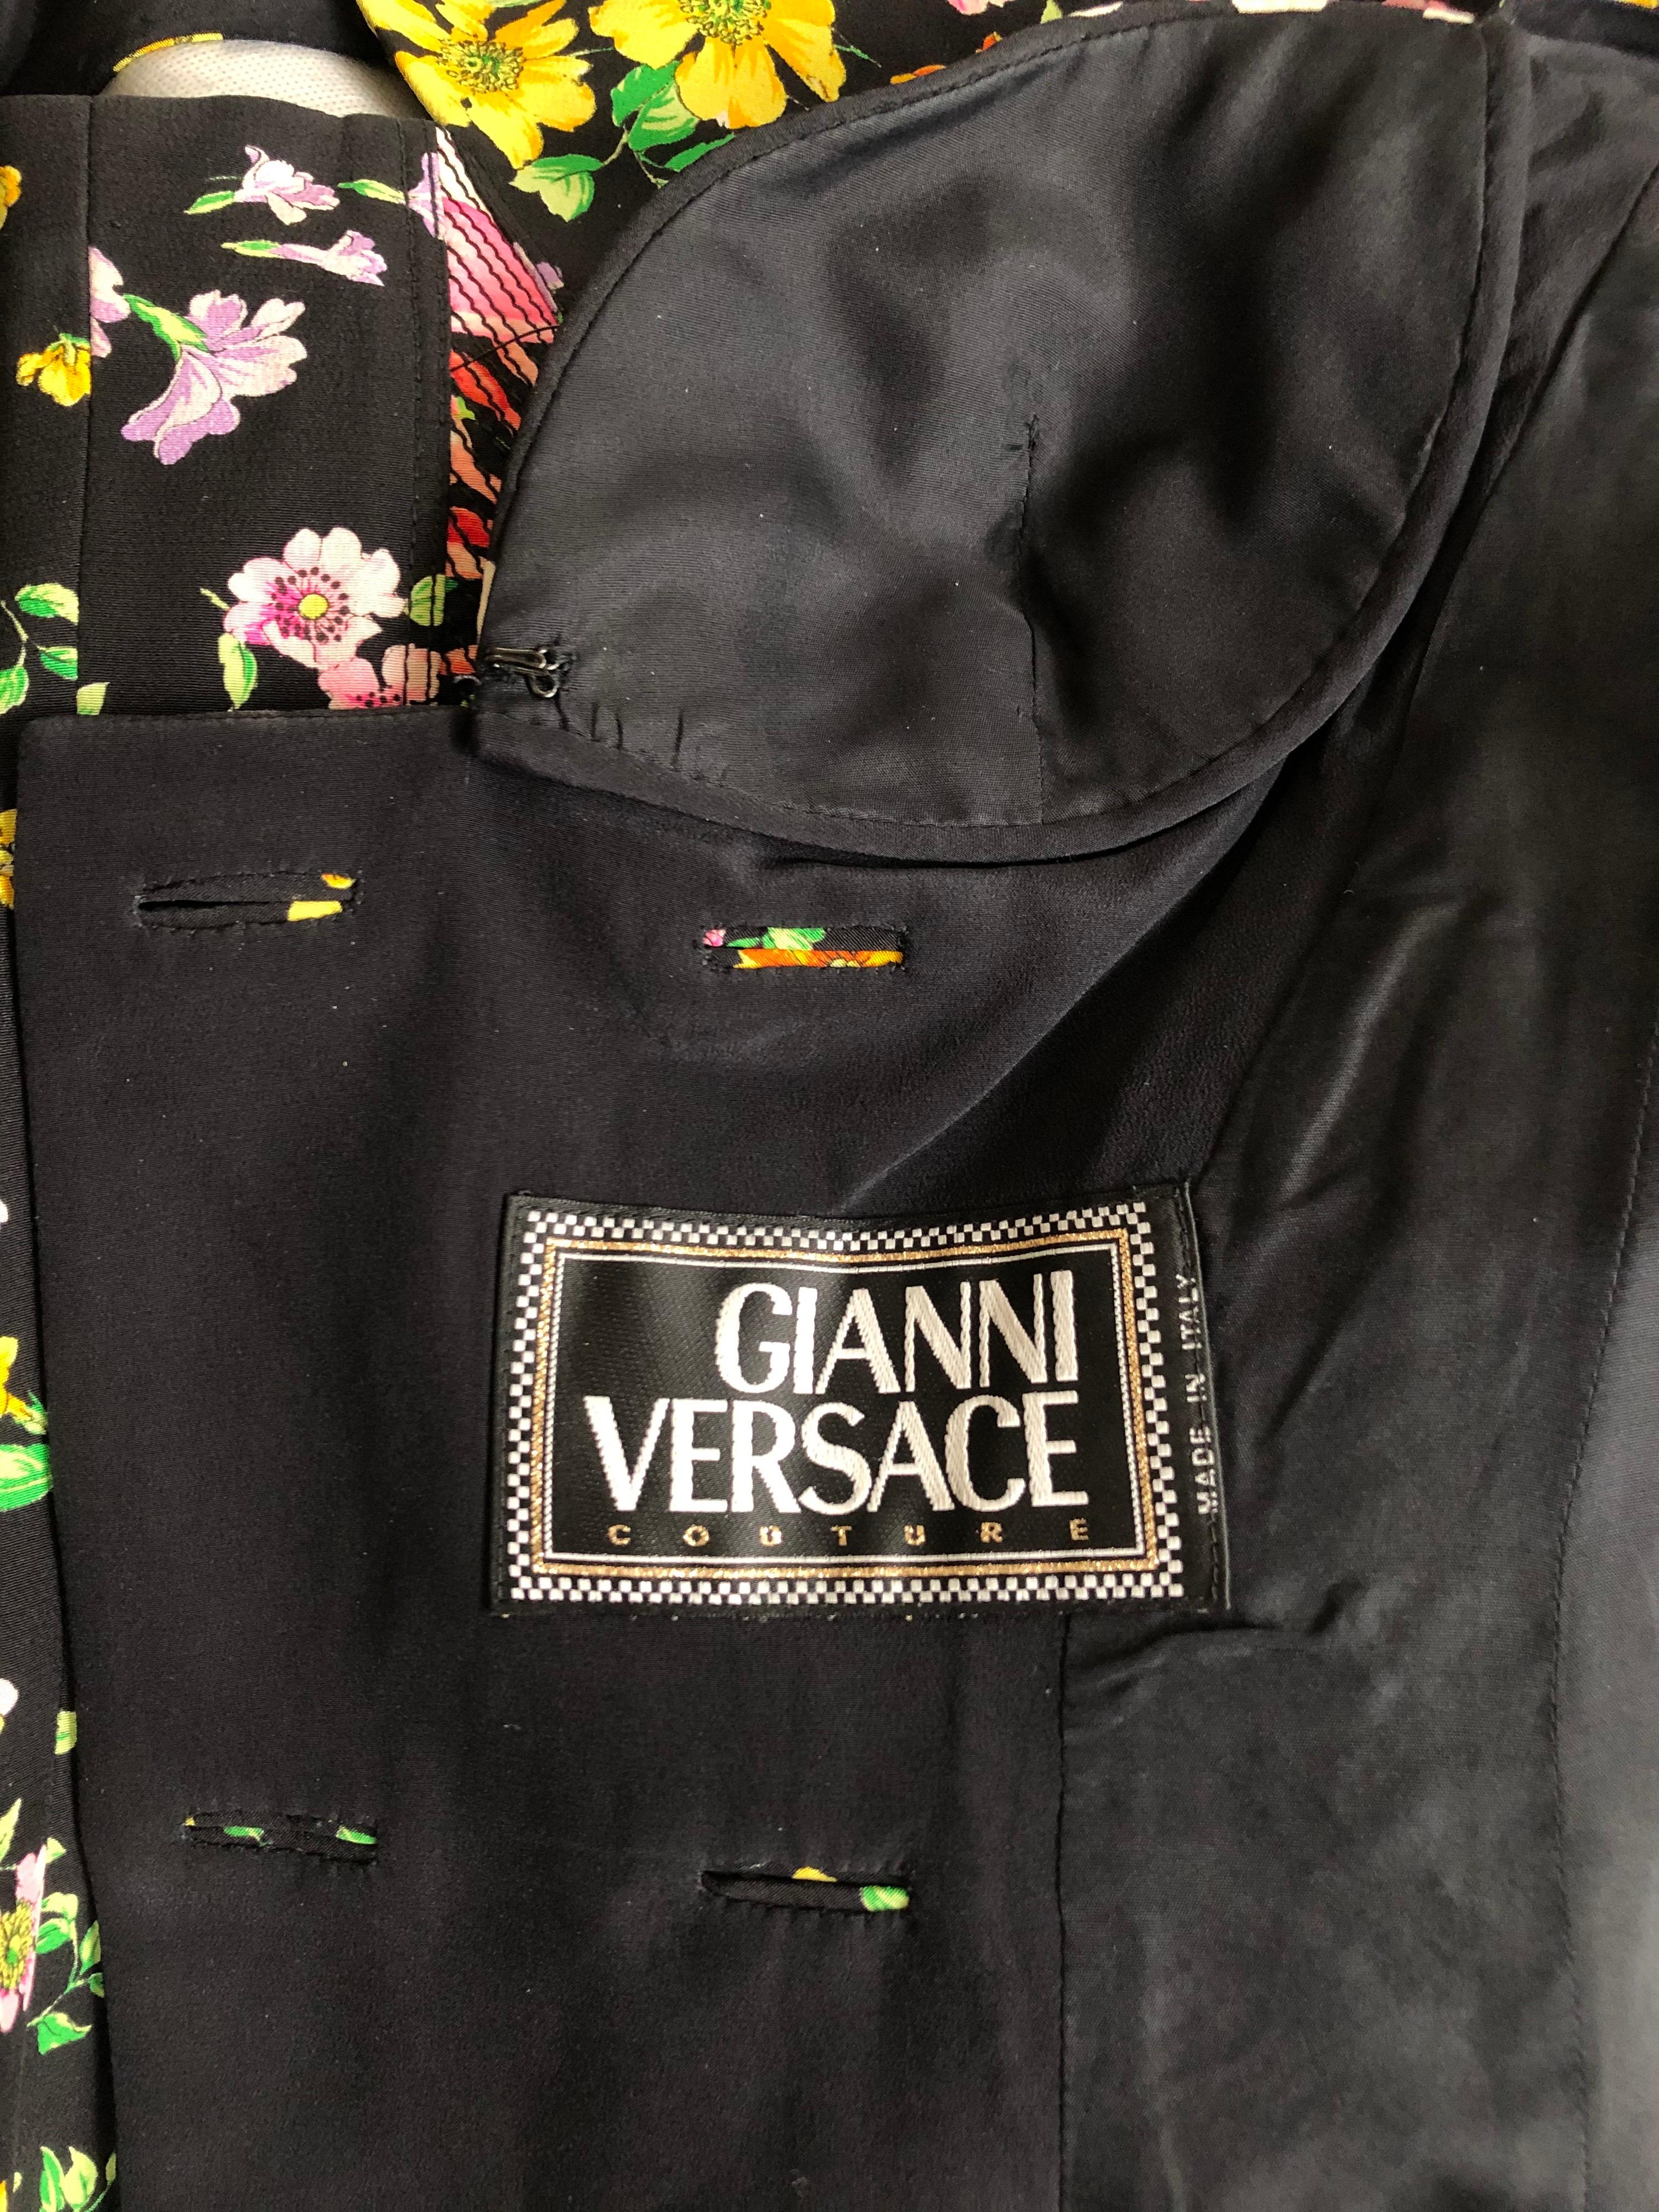 Gianni Versace S/S 1993 Runway Vintage Bustier Jacket Top In Good Condition For Sale In Naples, FL